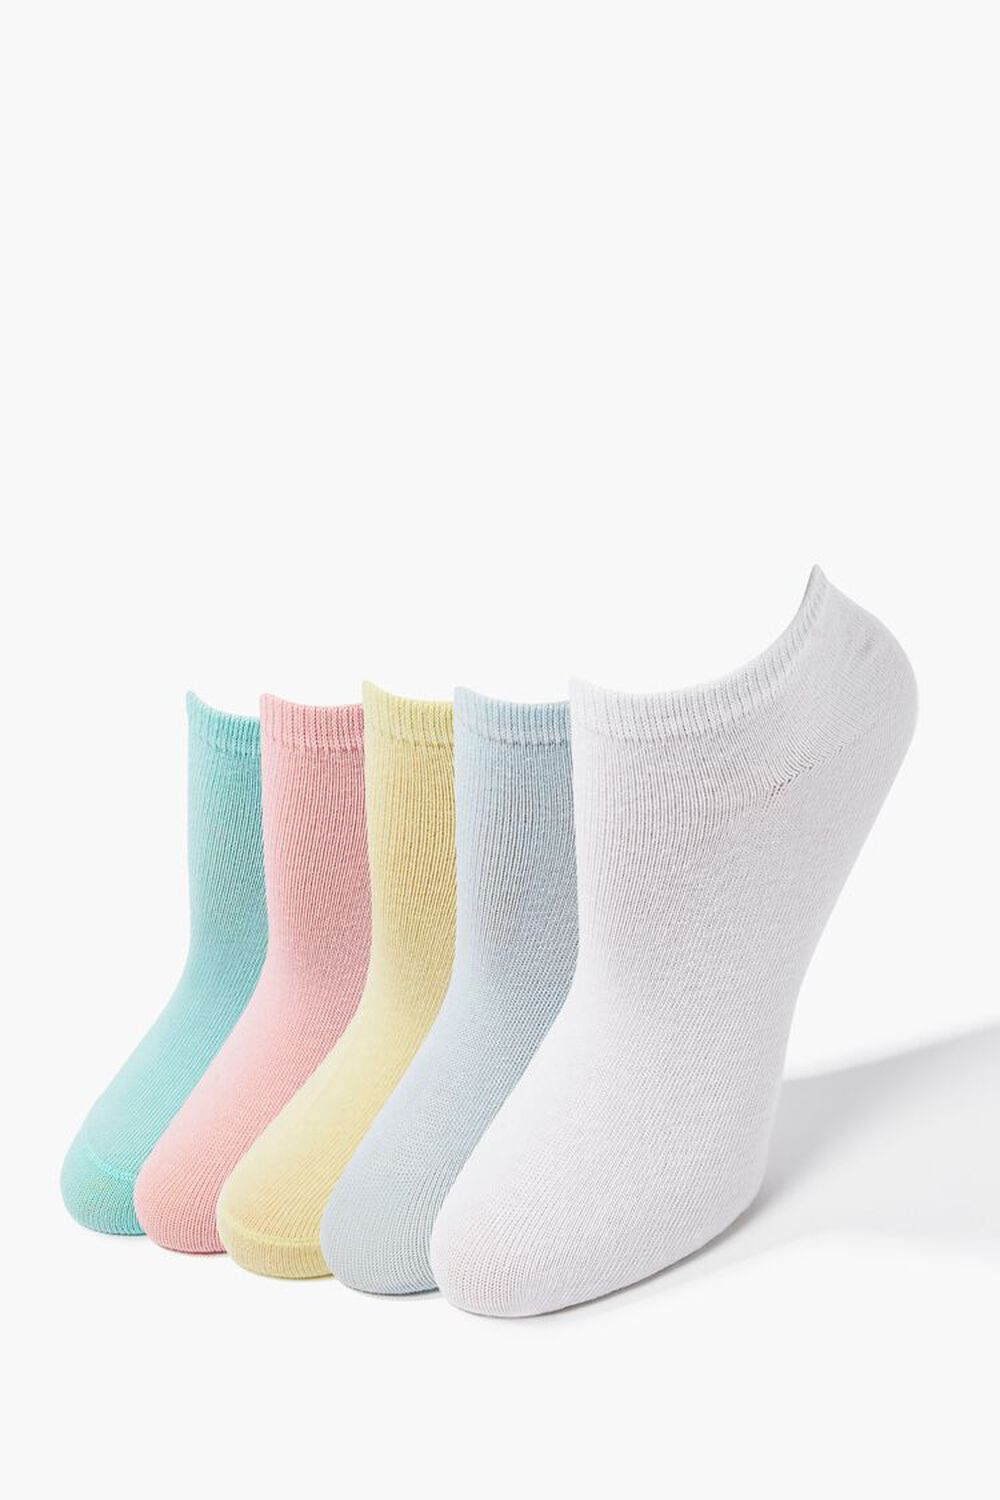 BLUE/YELLOW Marled Ankle Socks - 5 Pack, image 1